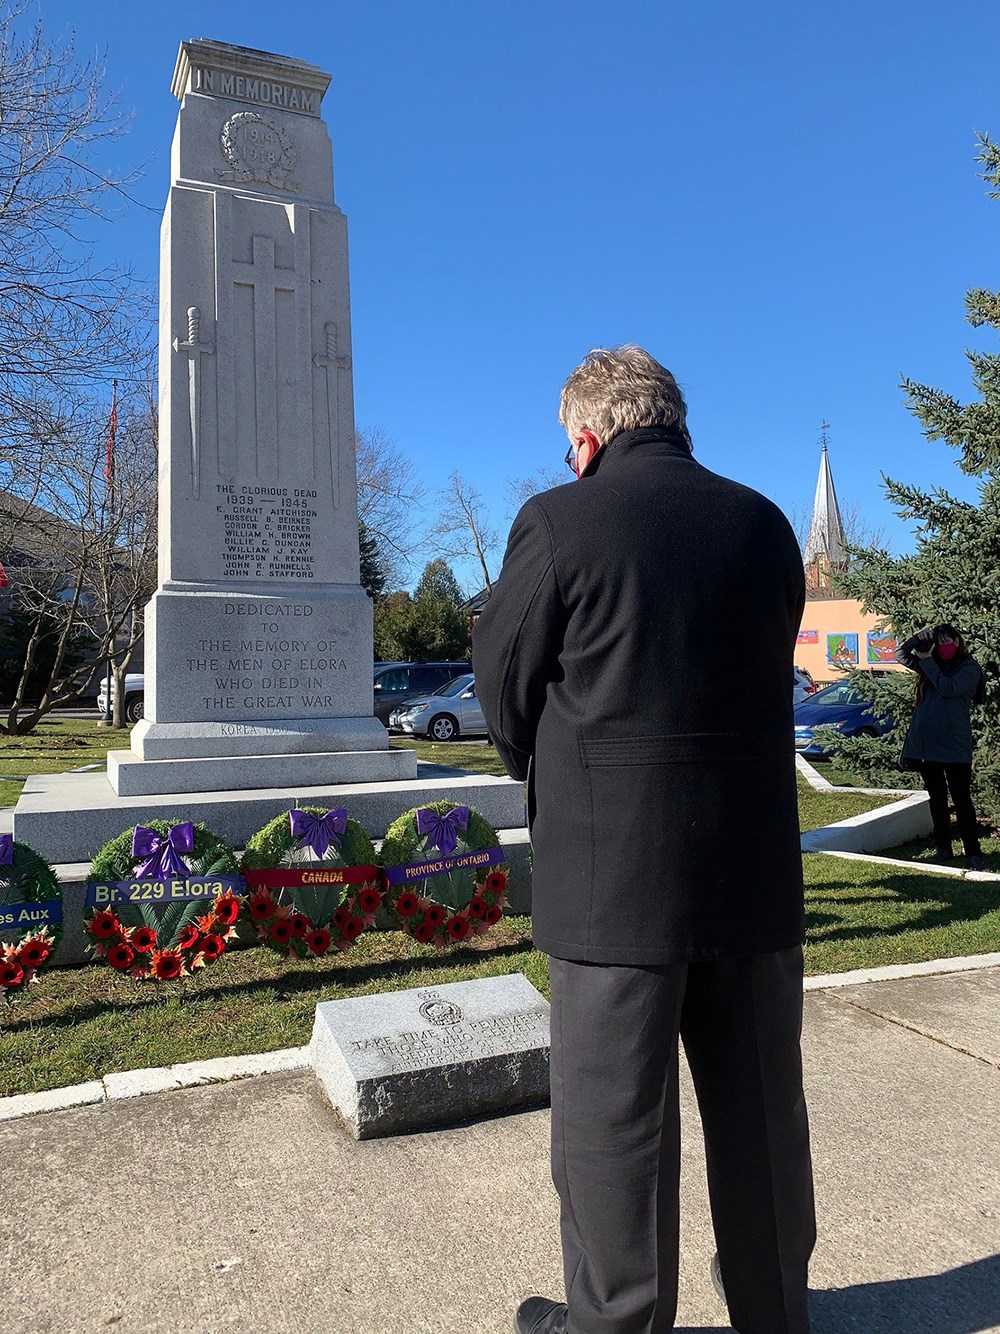 Wednesday, November 11, 2020 – Senator Robert Black commemorates Remembrance Day in Wellington County at the cenotaph in Elora, Ontario.